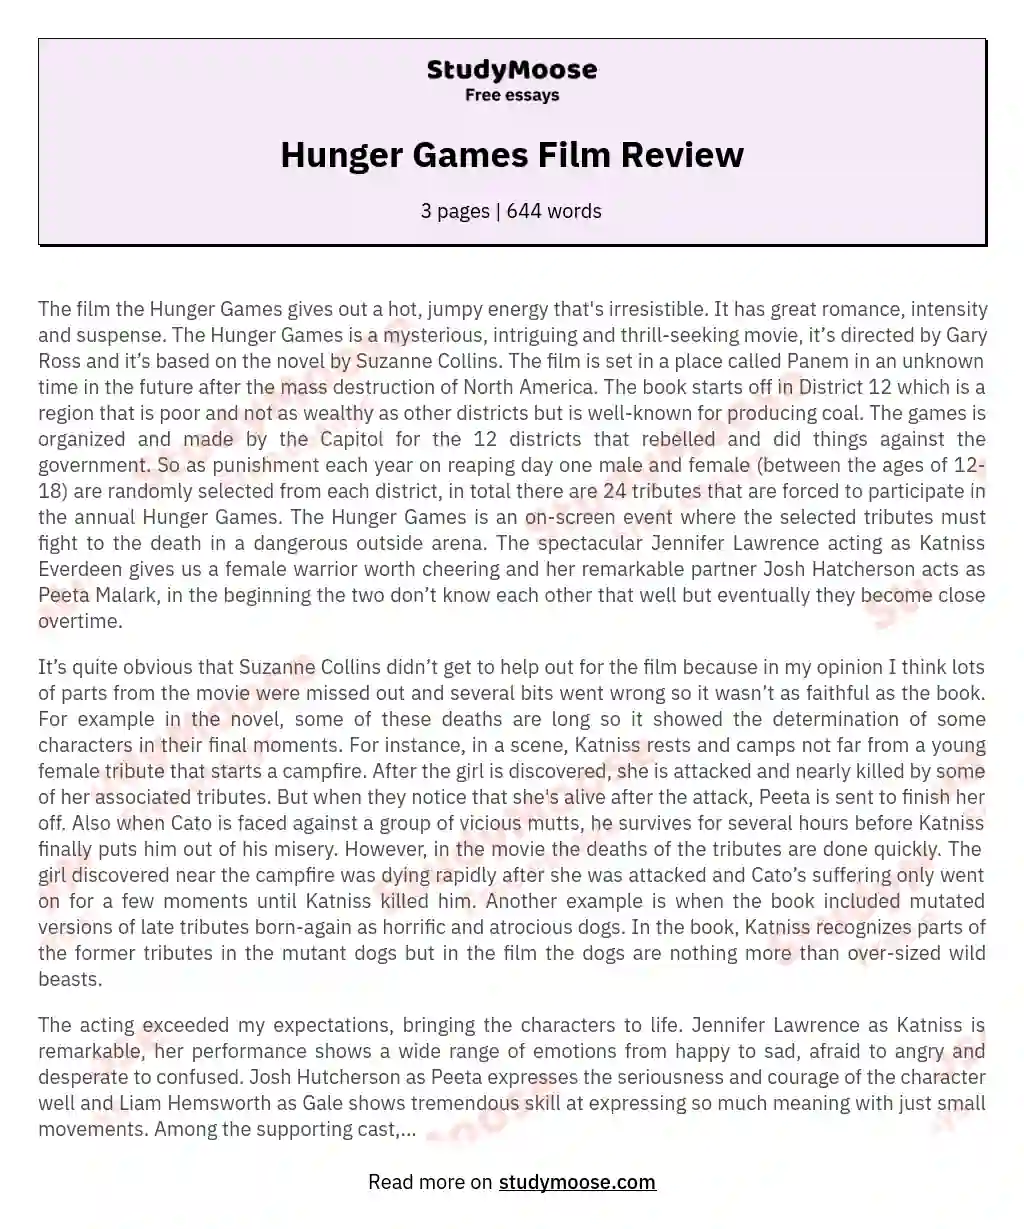 Hunger Games Film Review essay